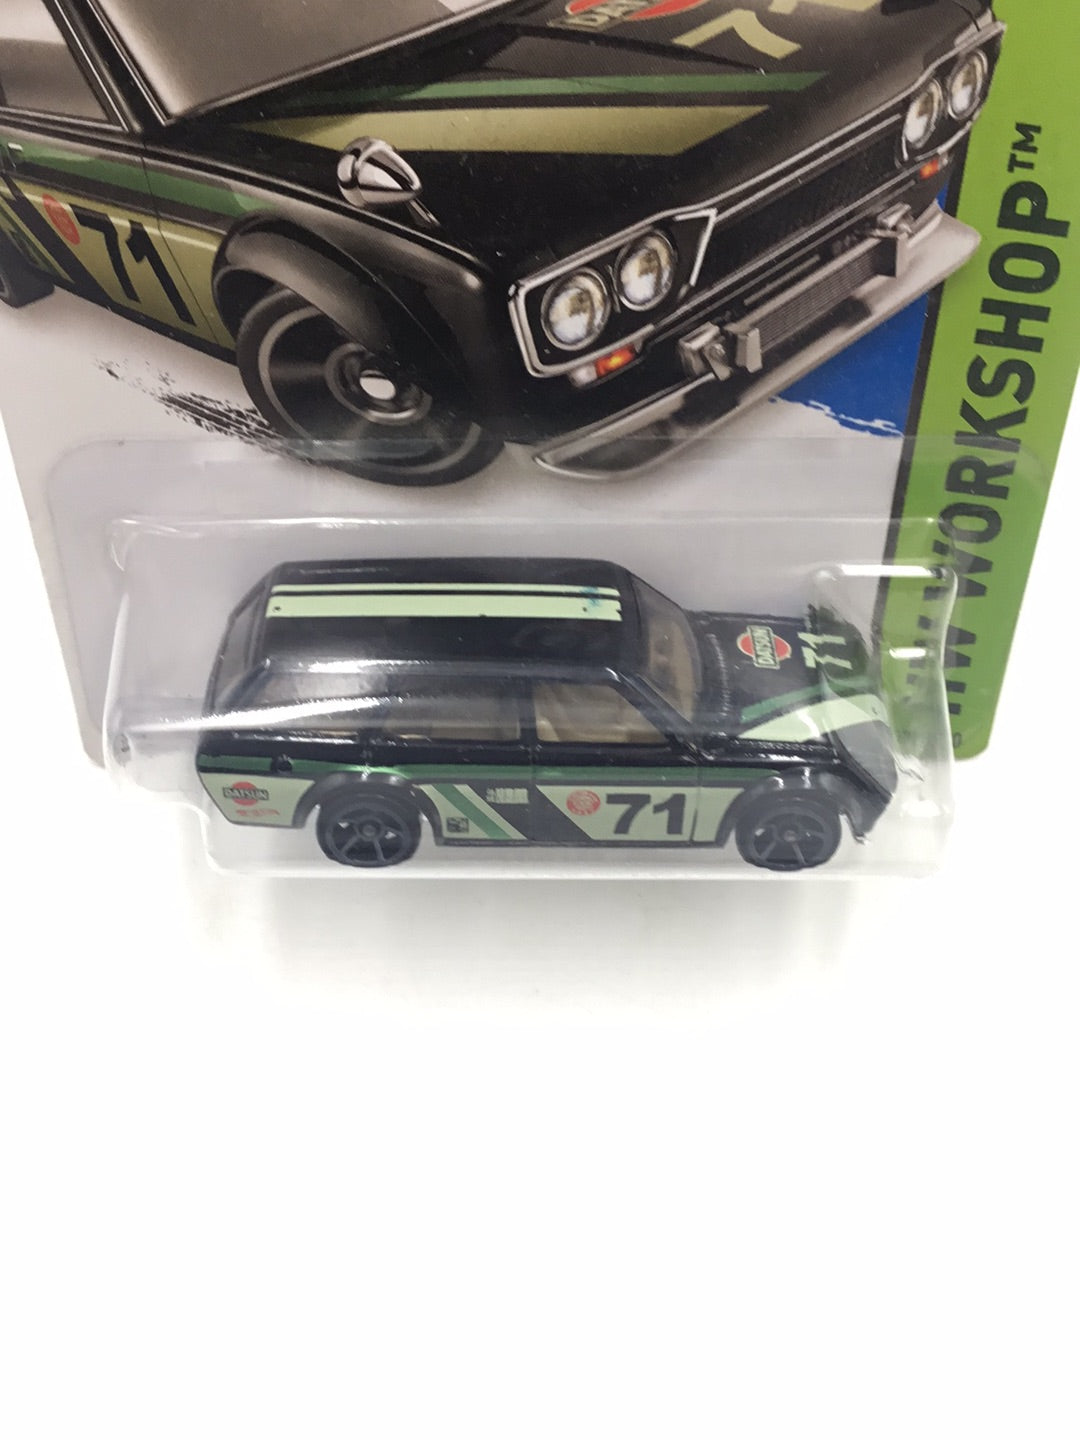 Hot Wheels 2017 71 Datsun Bluebird 510 wagon Kmart exclusive with protector